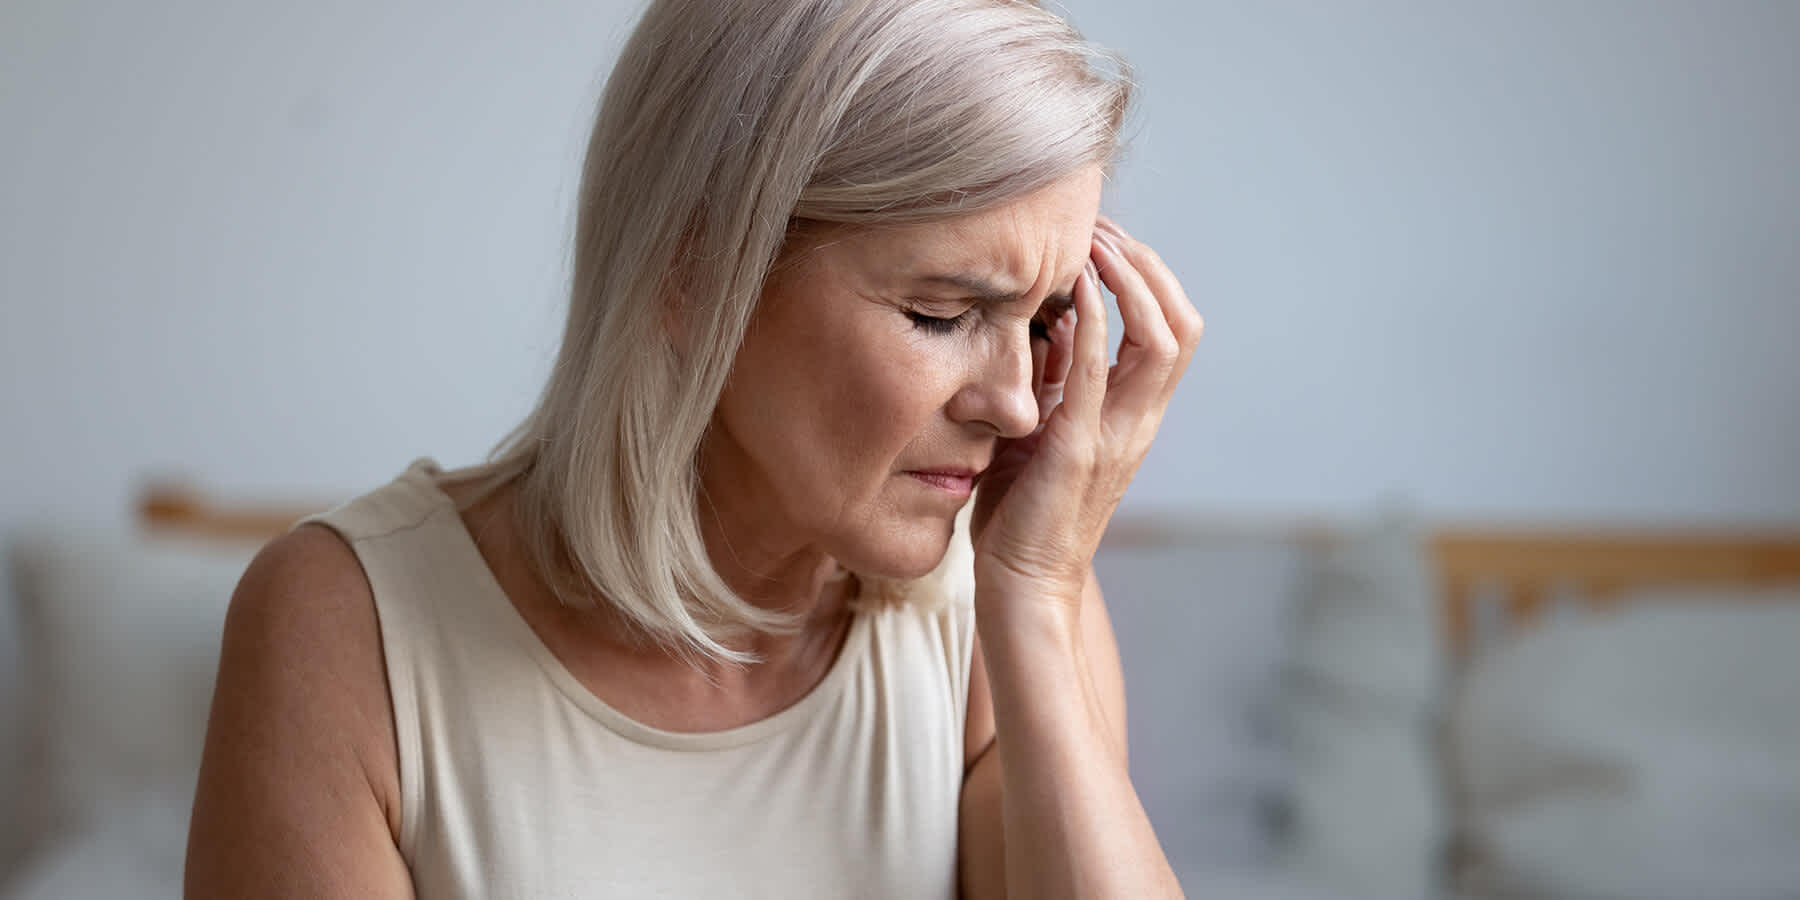 Bleeding after menopause: What symptoms are normal?